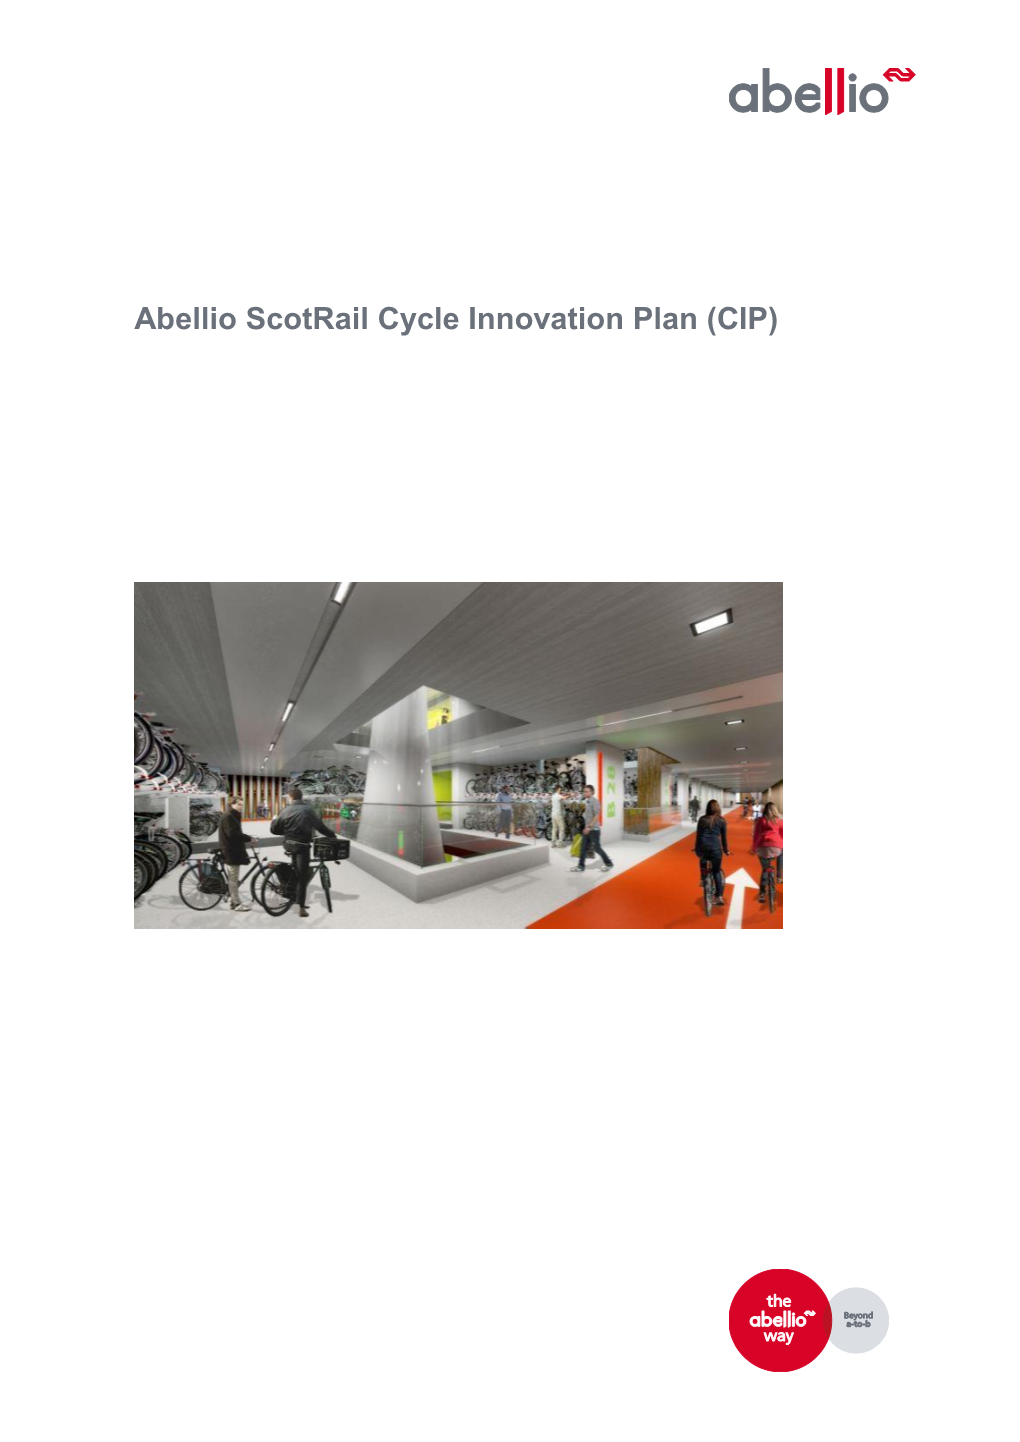 Abellio Scotrail Cycle Innovation Plan (CIP)